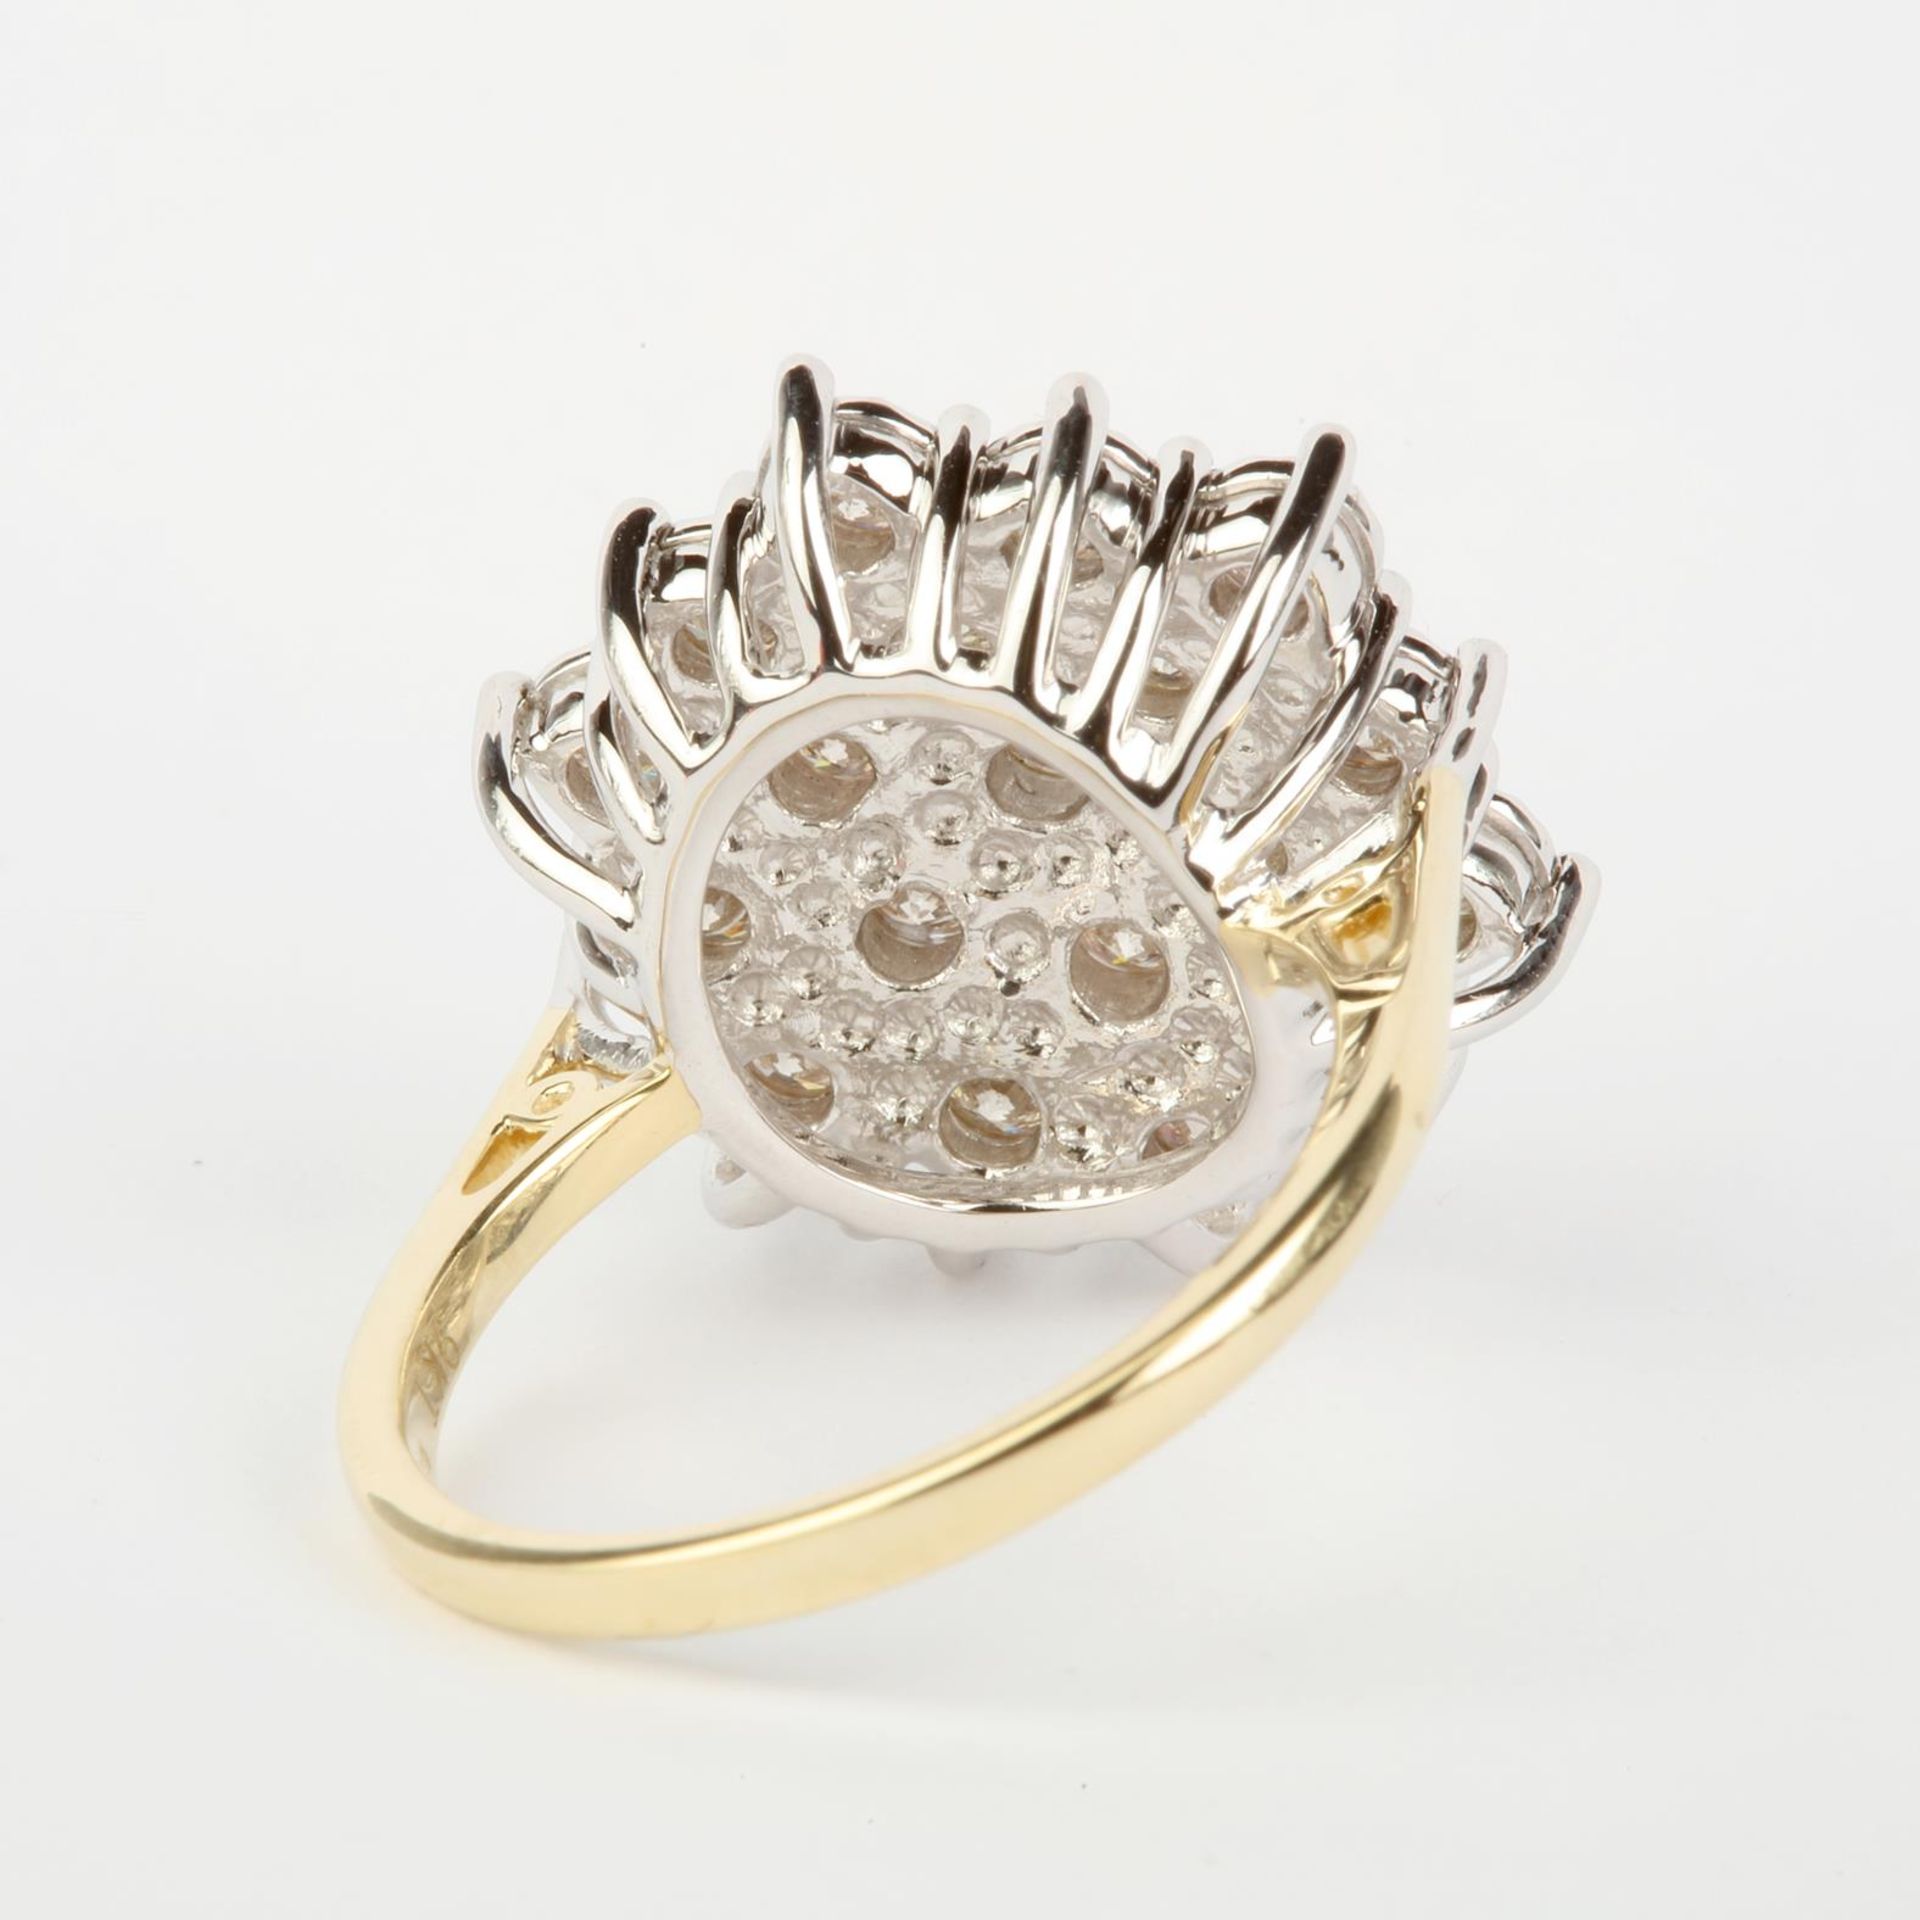 + VAT Ladies Gold 1ct Diamond Cluster Ring With 19 Diamonds Set In White Gold Mount - Image 2 of 3